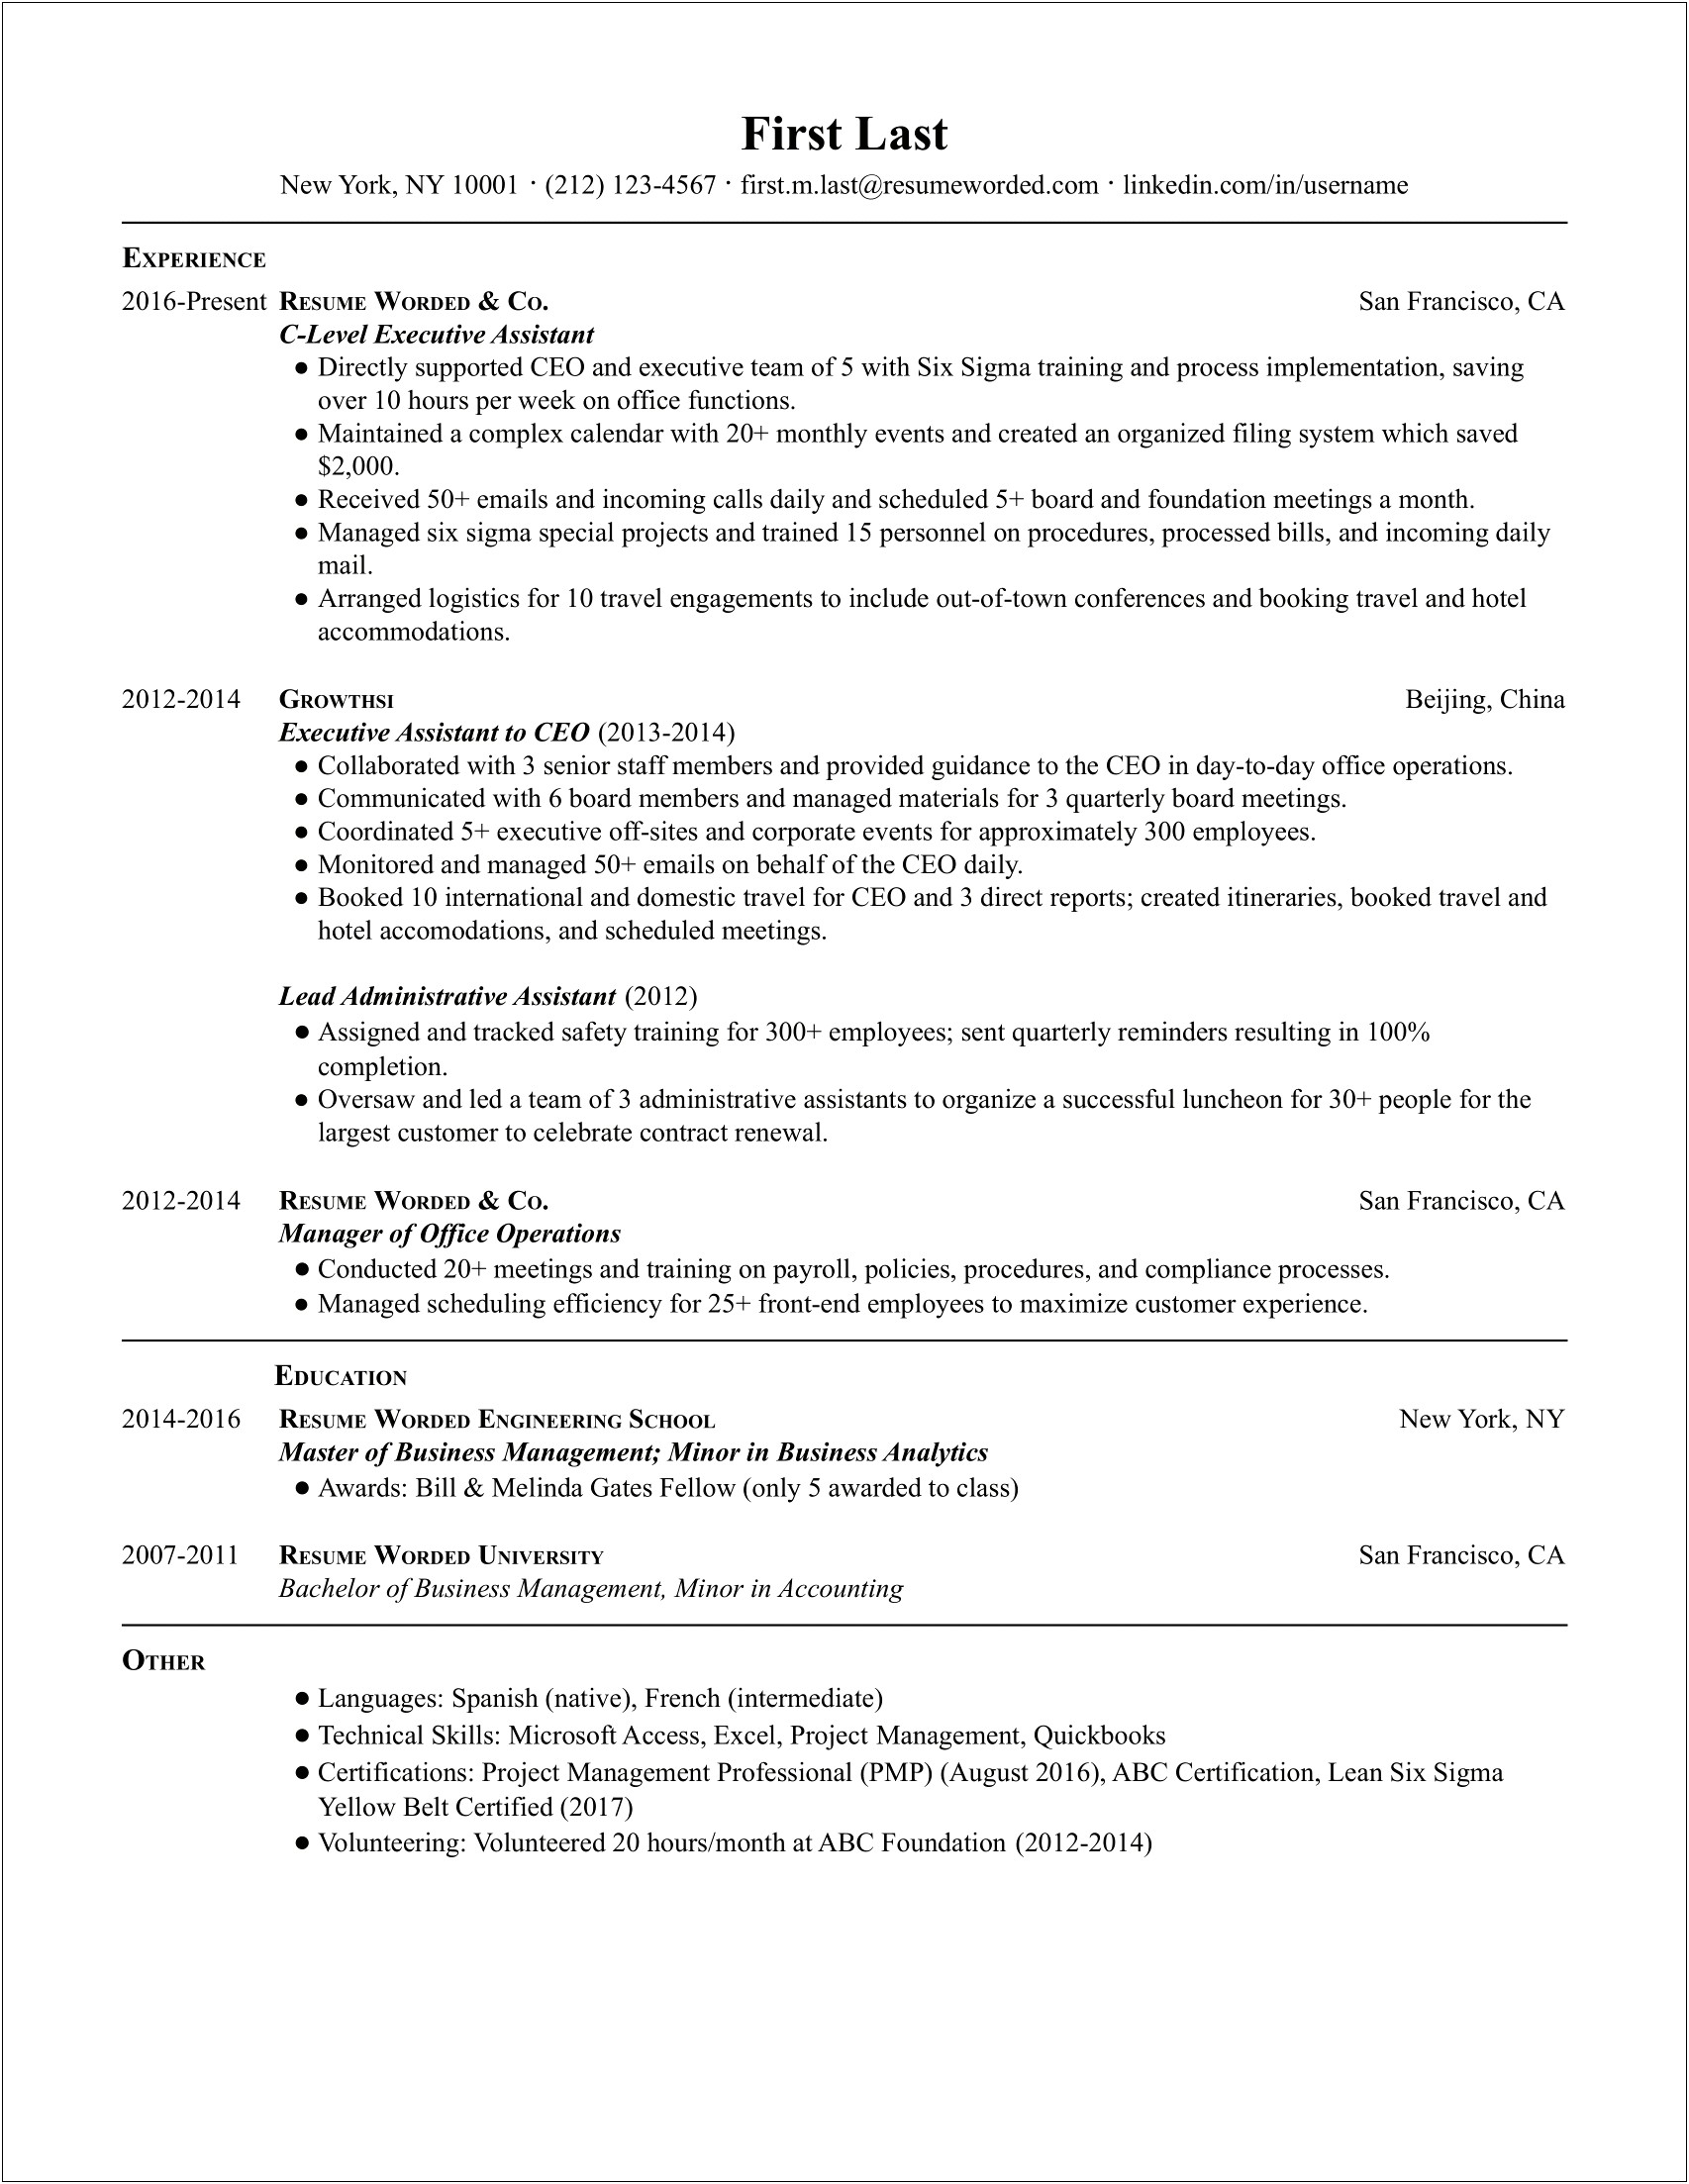 Example Resume Of Administrative Assistant To Ceo